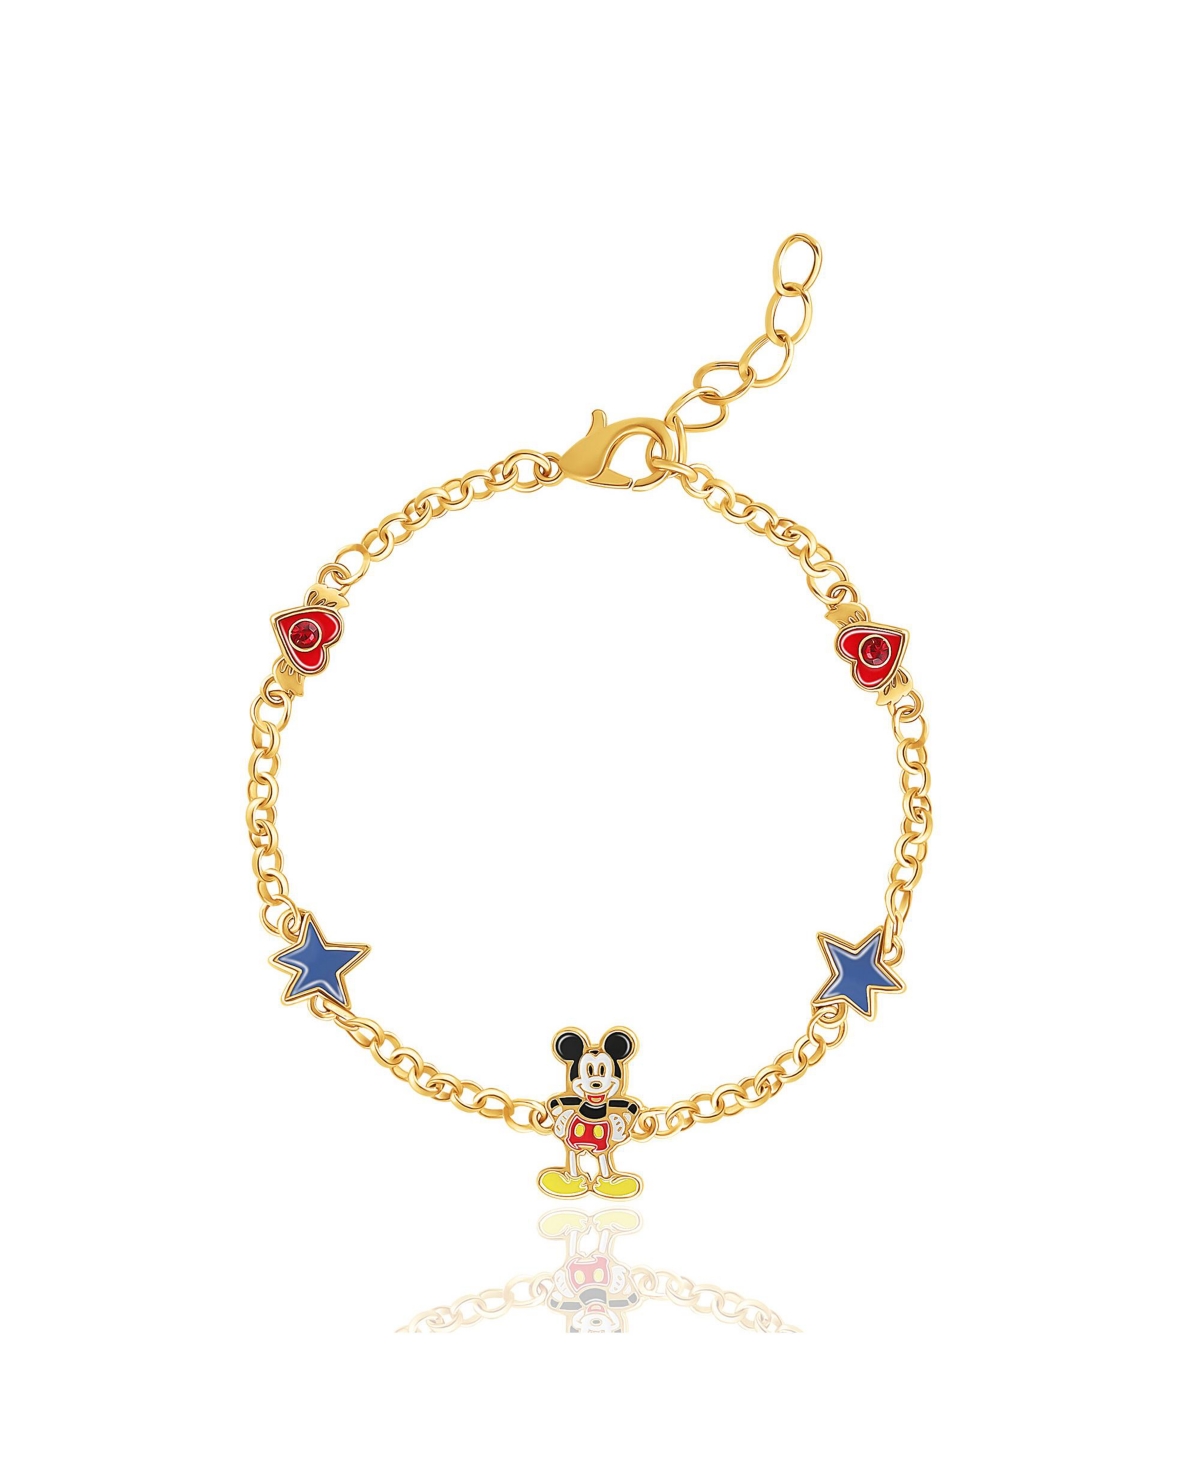 Womens Mickey Mouse Bracelet with Station Pendants 6.5" + 1" - Gold Plated Mickey Bracelet Officially Licensed - Gold tone, red, blue